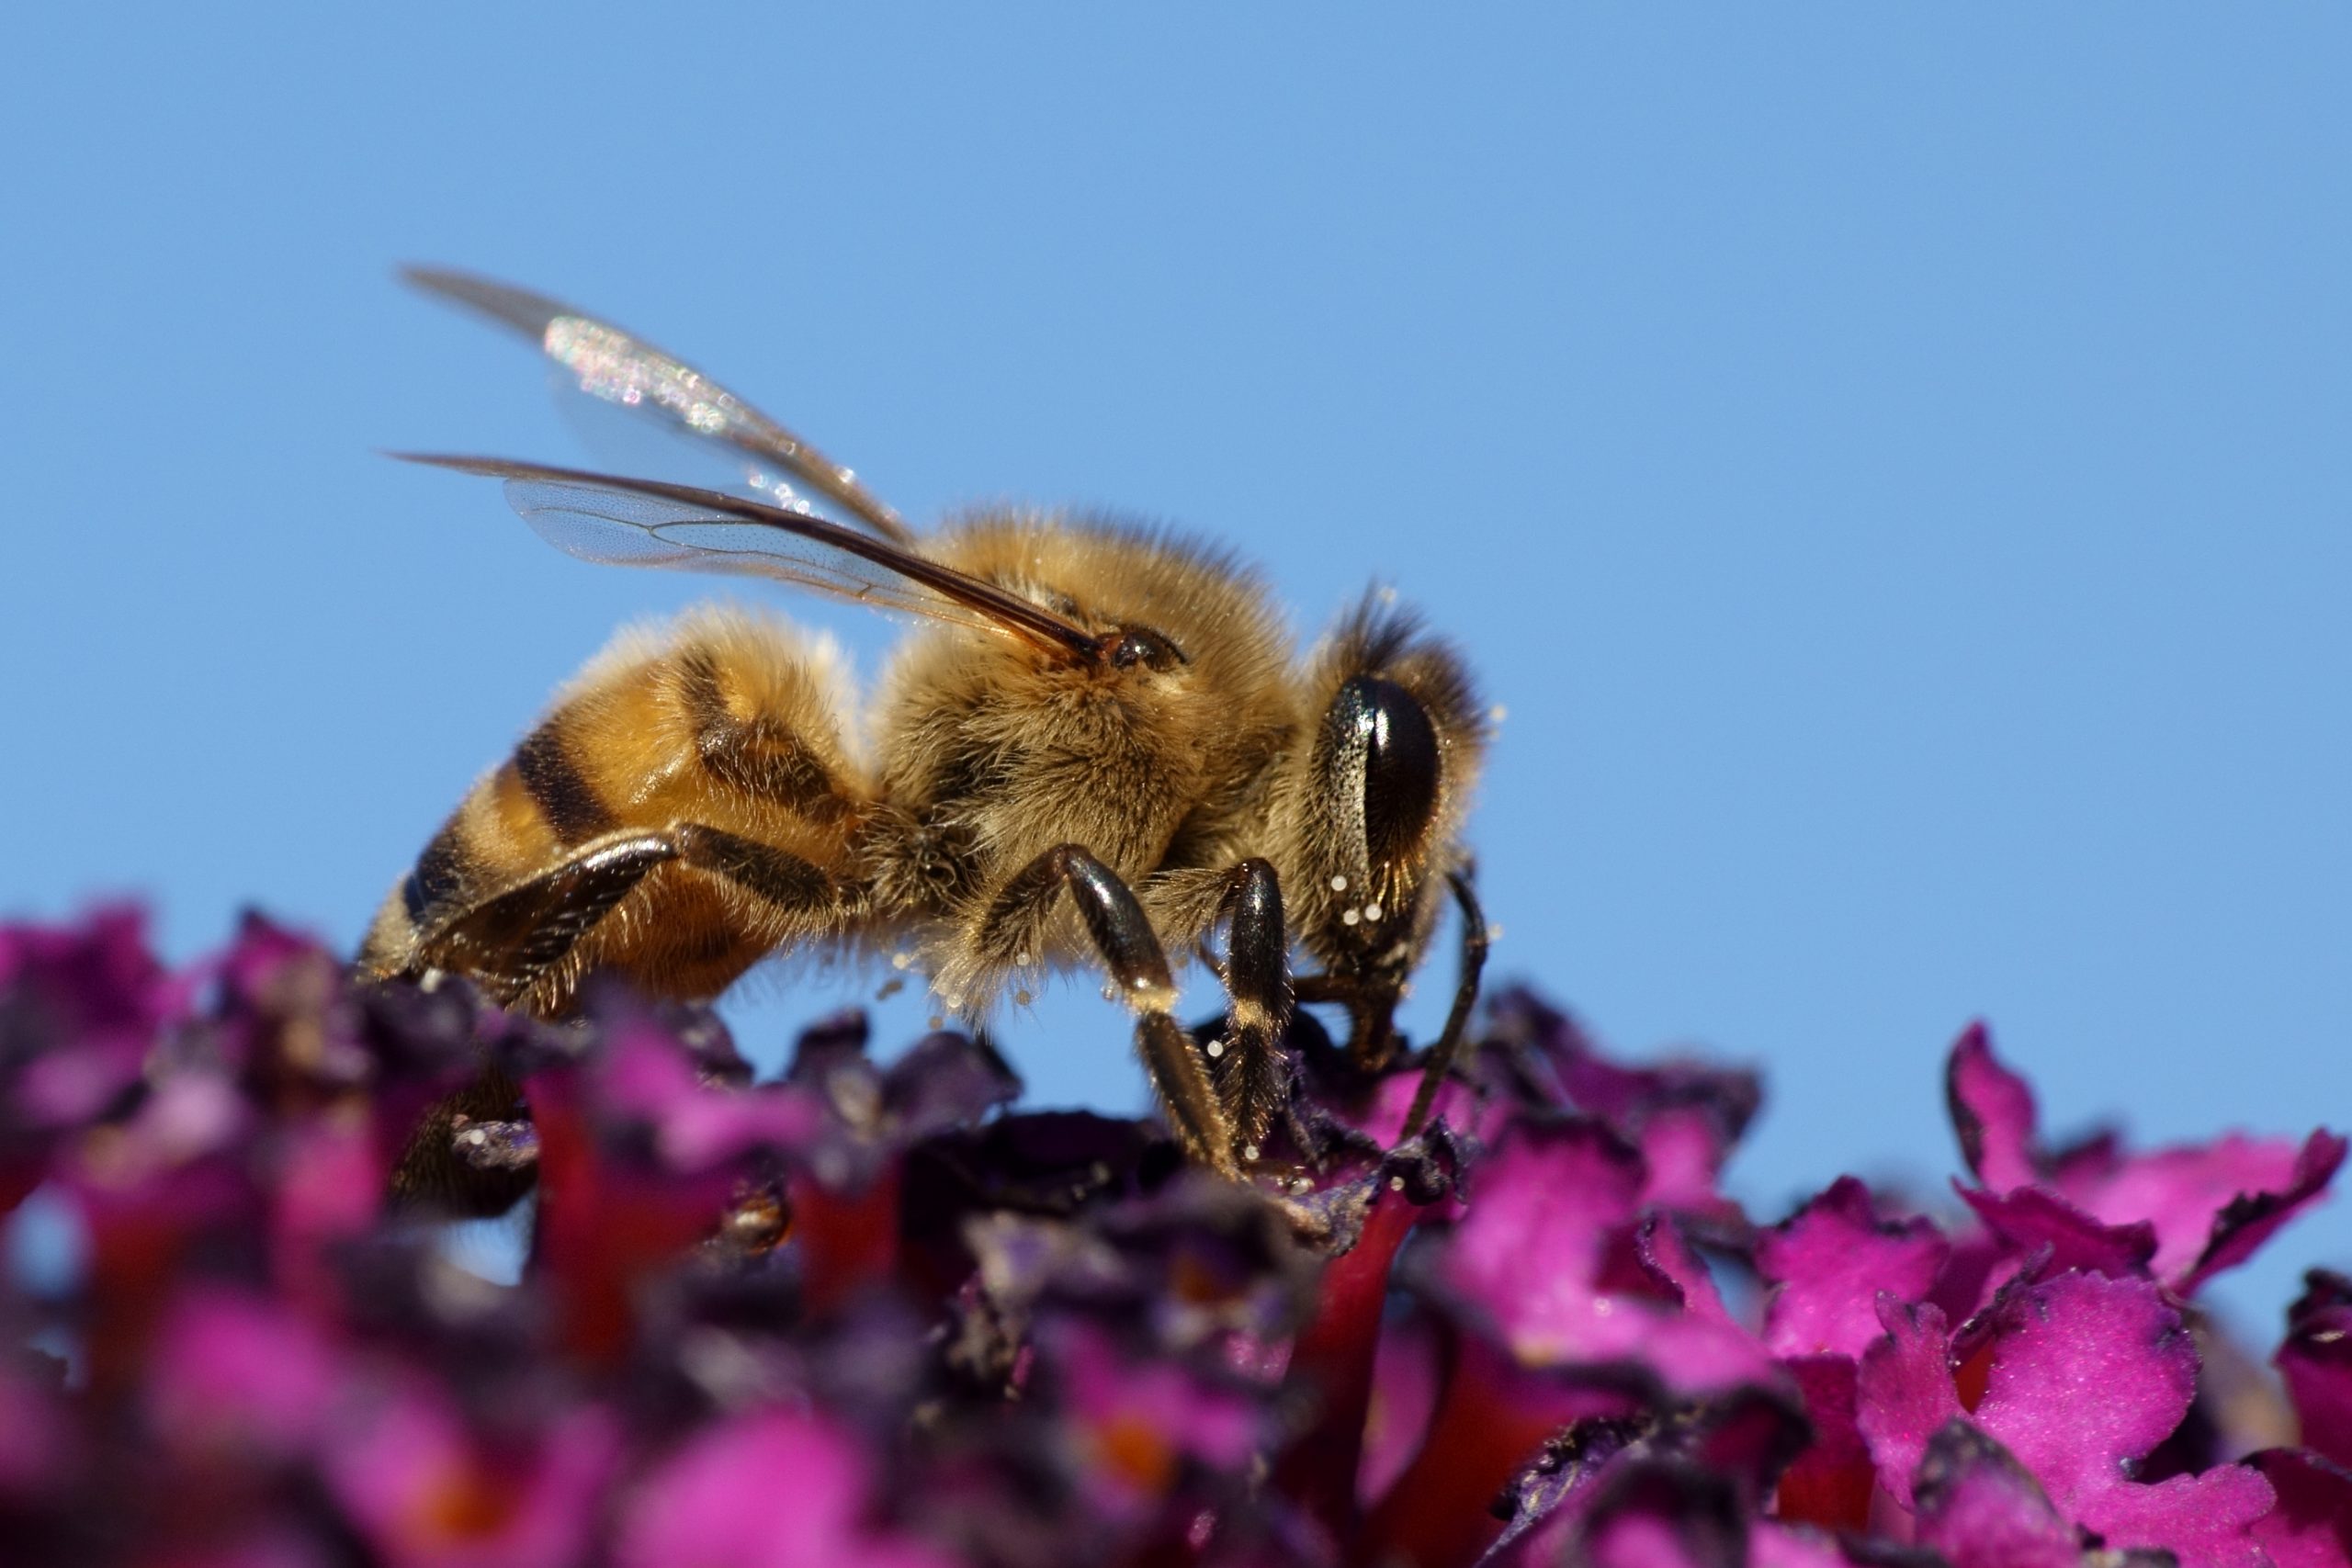 Some Fun Facts About Honey Bees